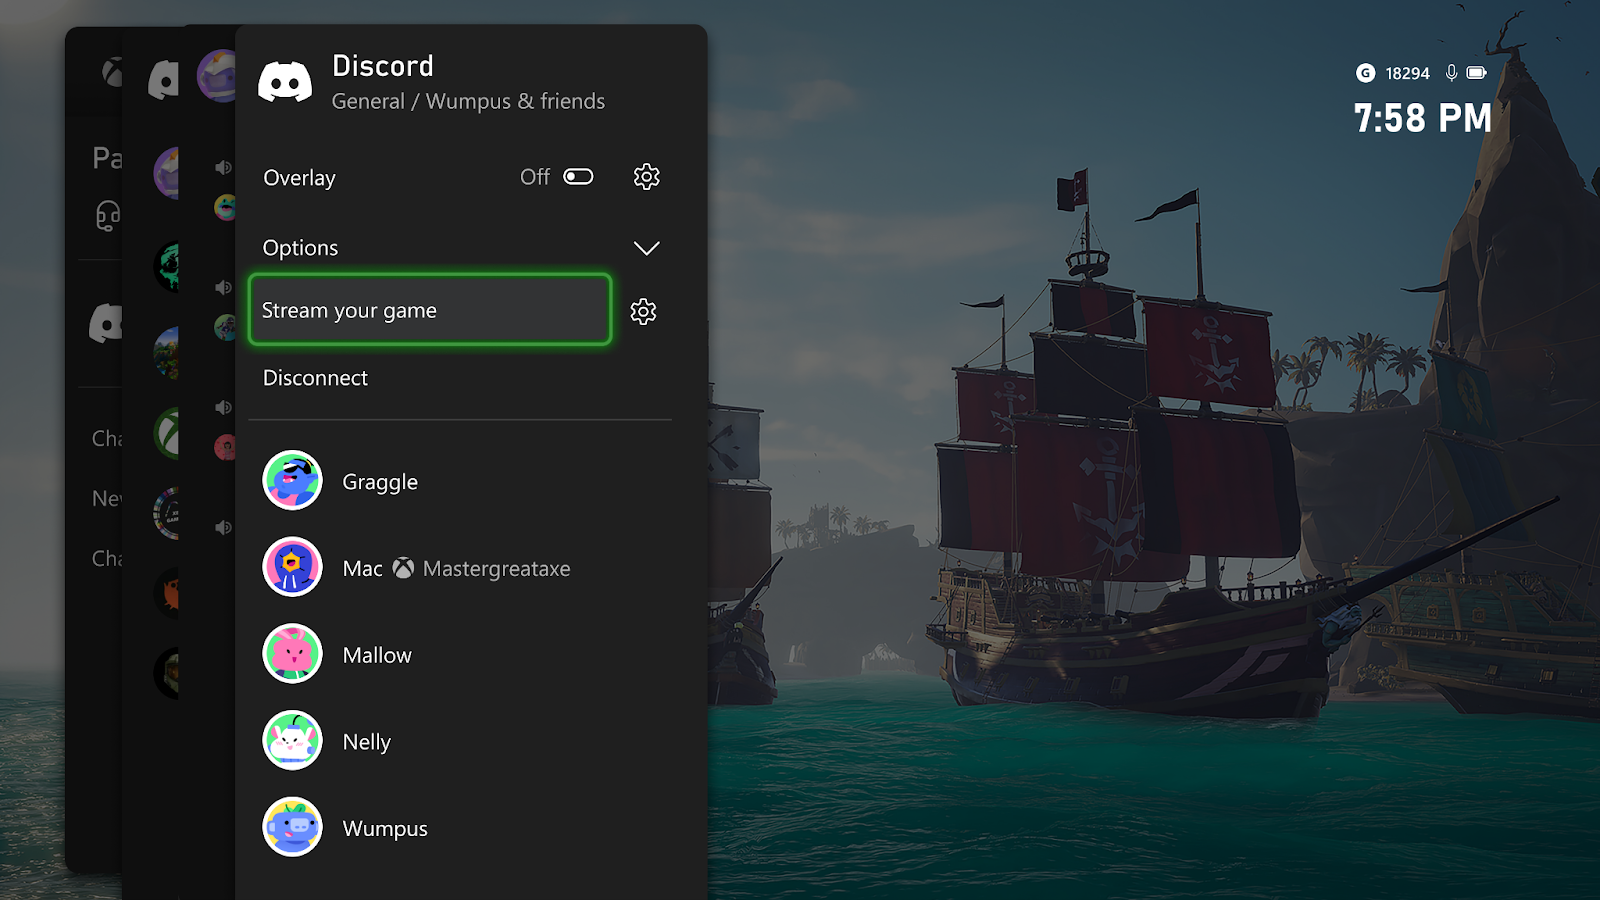 A screenshot of an Xbox in the middle of a Discord Voice call. The player using the Xbox is playing Sea of Thieves in the background, and they have the new “Stream your game” option highlighted, implying they’re about to Stream to Discord from their Xbox.